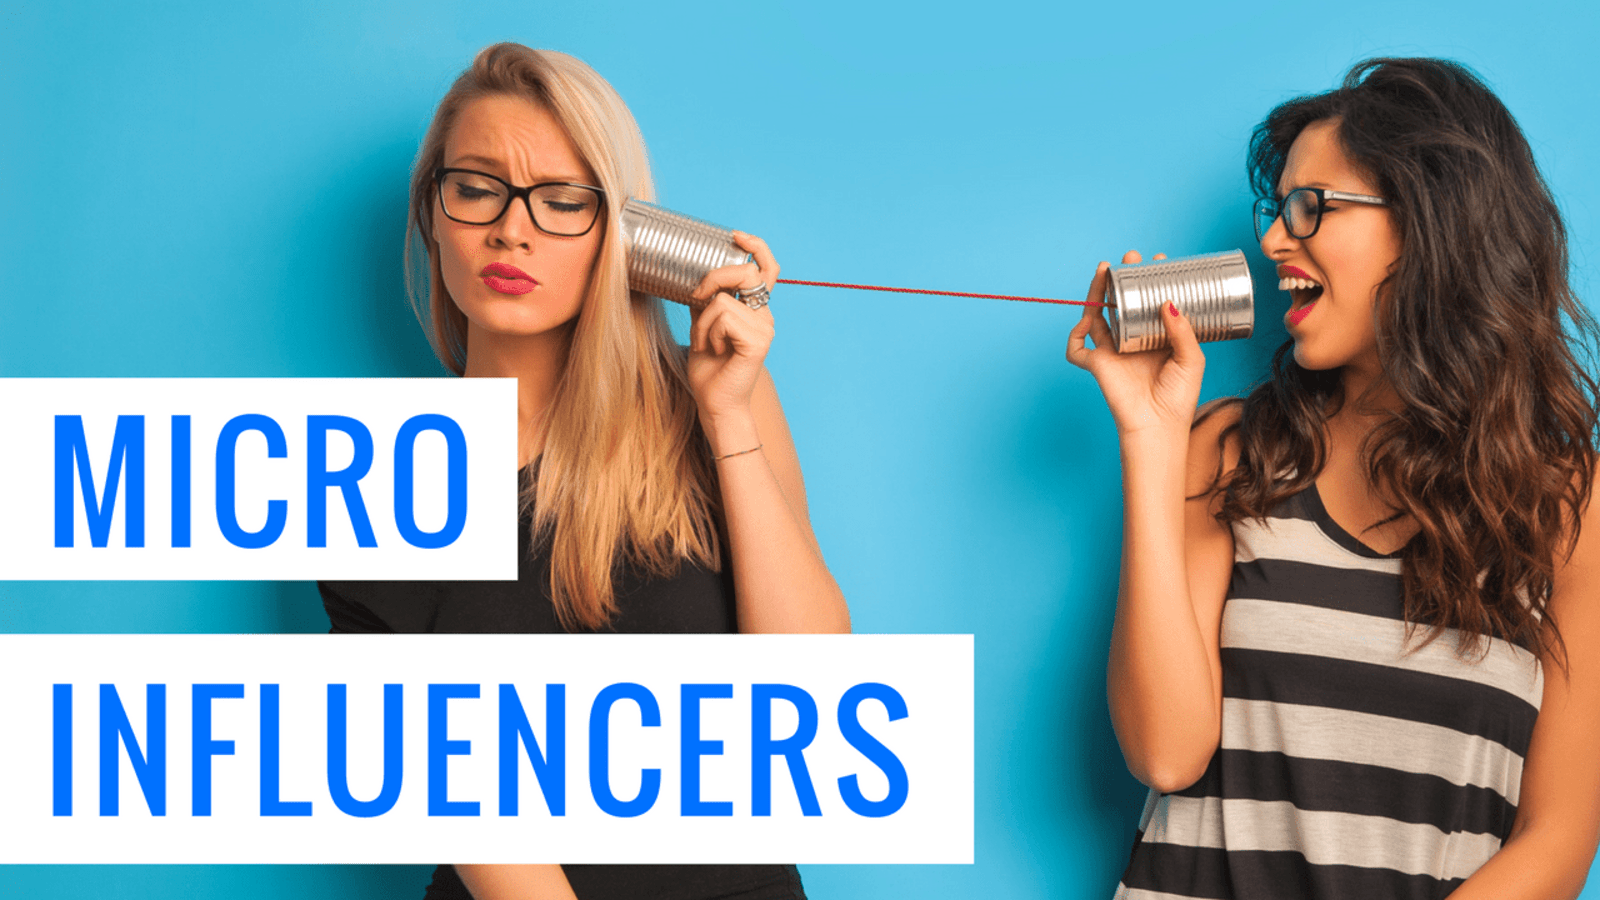 How Micro-Influencers Can Drive Big Results for Brands